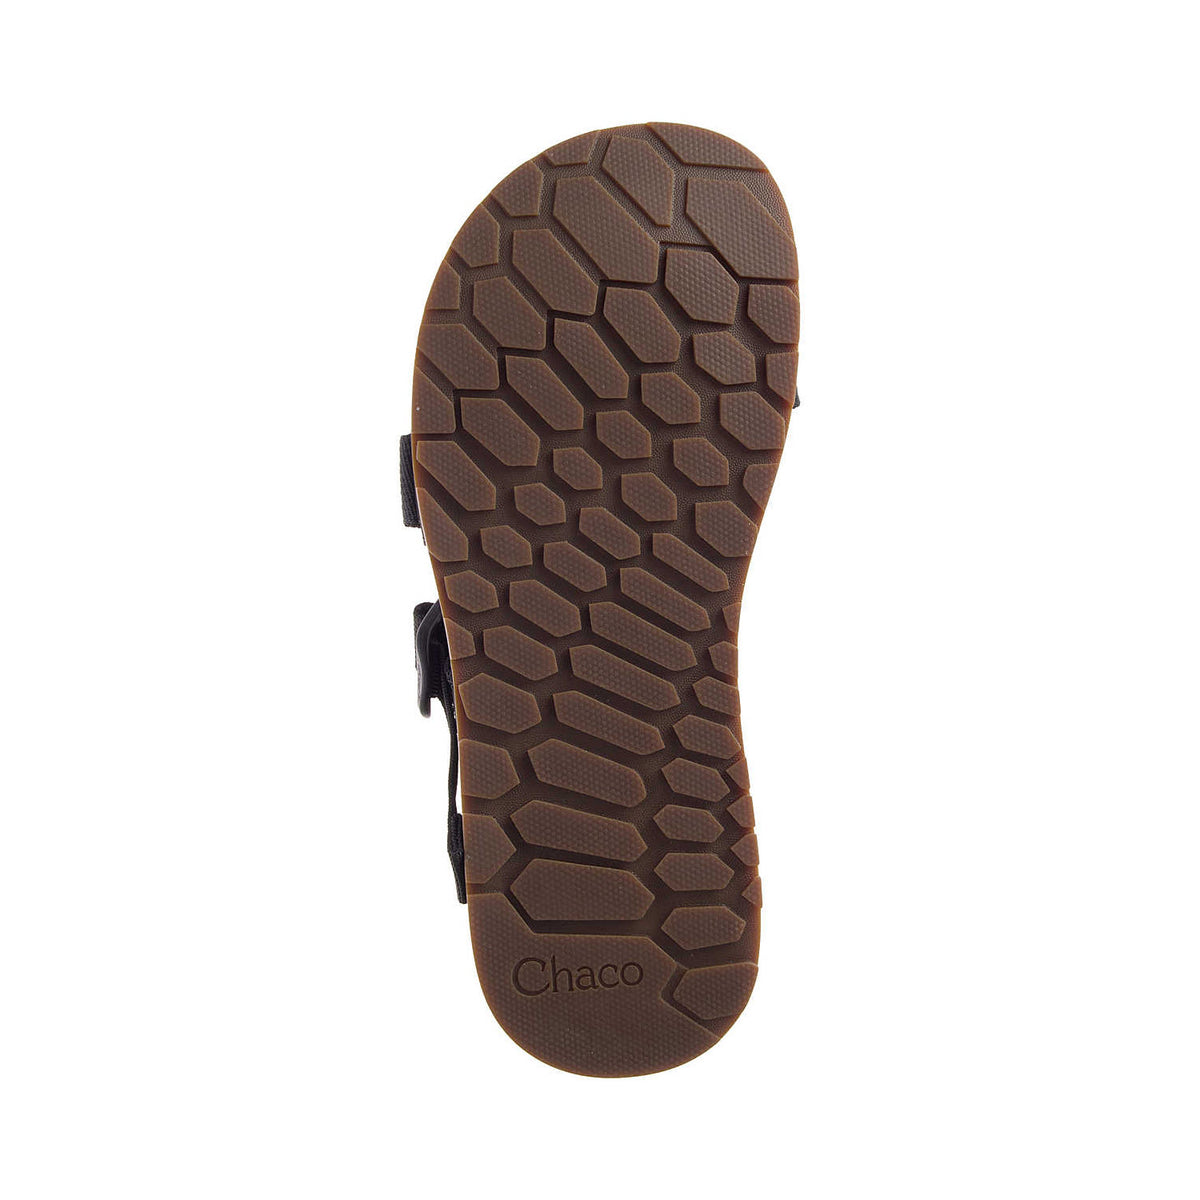 Bottom view of a Chaco Lowdown Slide Woven Black - Mens showing its brown hexagon-patterned sole.